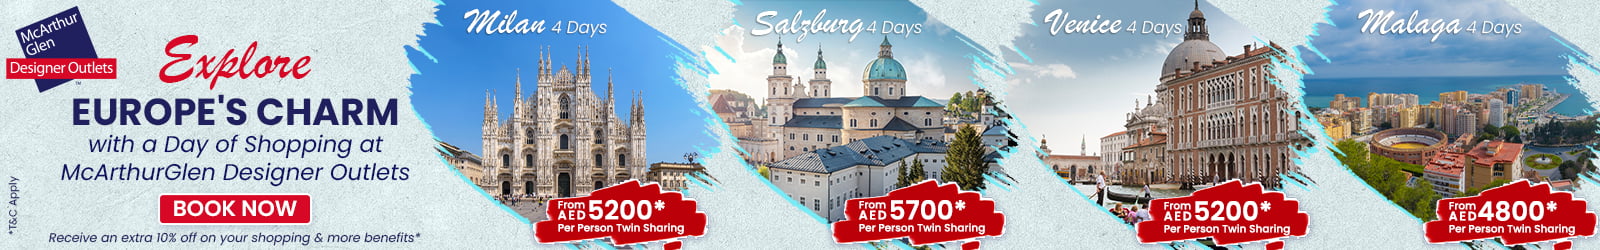 Europe Holiday Packages from Dubai, UAE